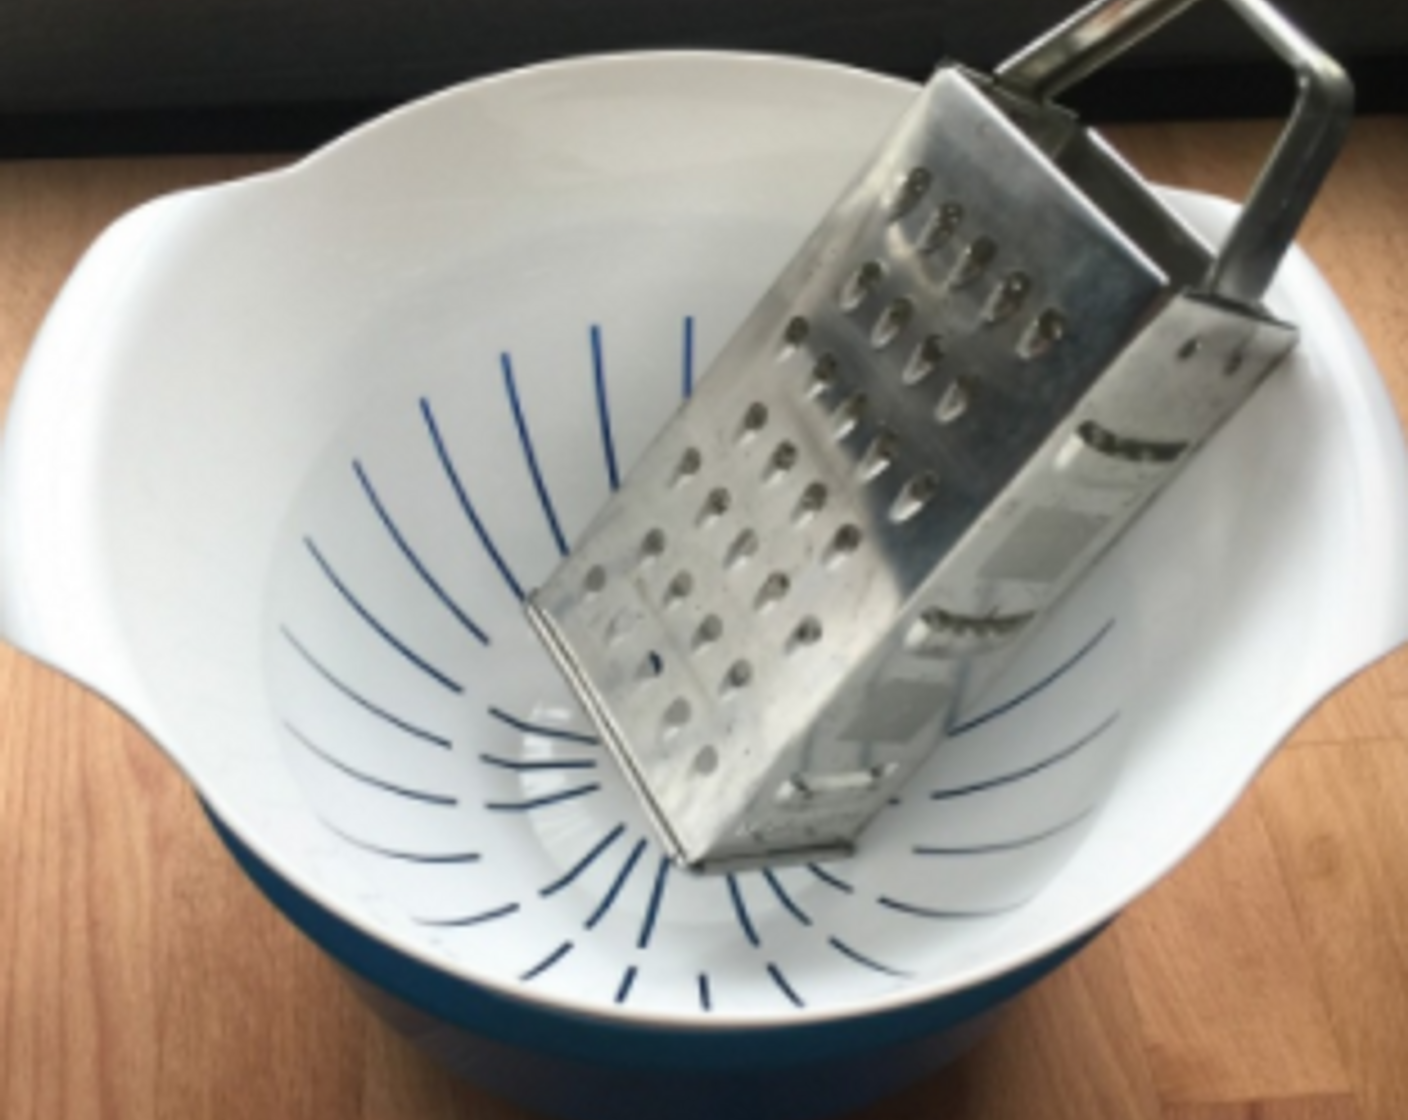 step 9 To hand-grate the pineapples, place a strainer over a large plastic or ceramic bowl and place a grater in it.